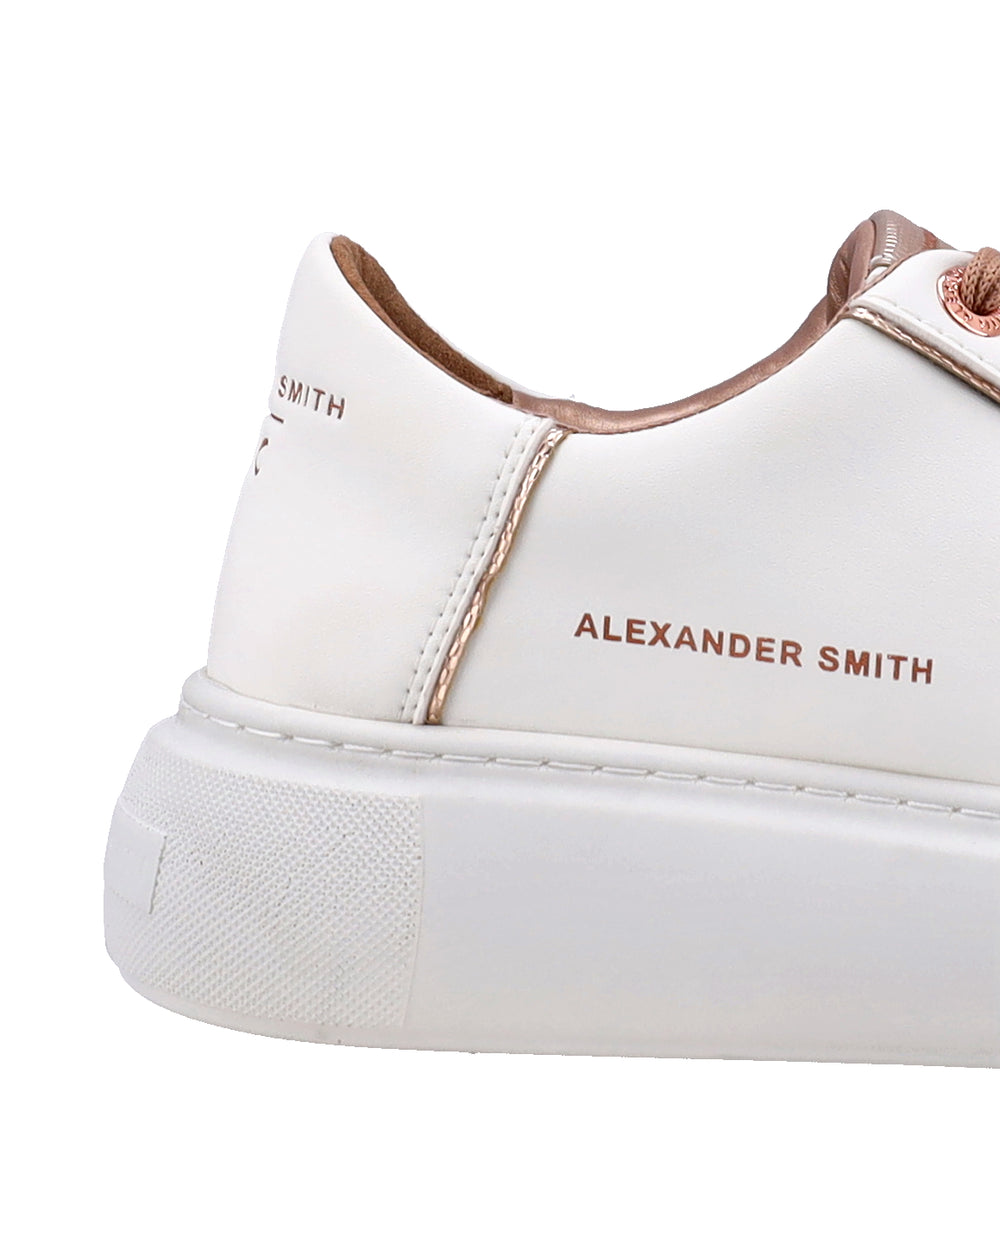 ALEXANDER SMITH | ACBC GREENWICH SNEAKERS